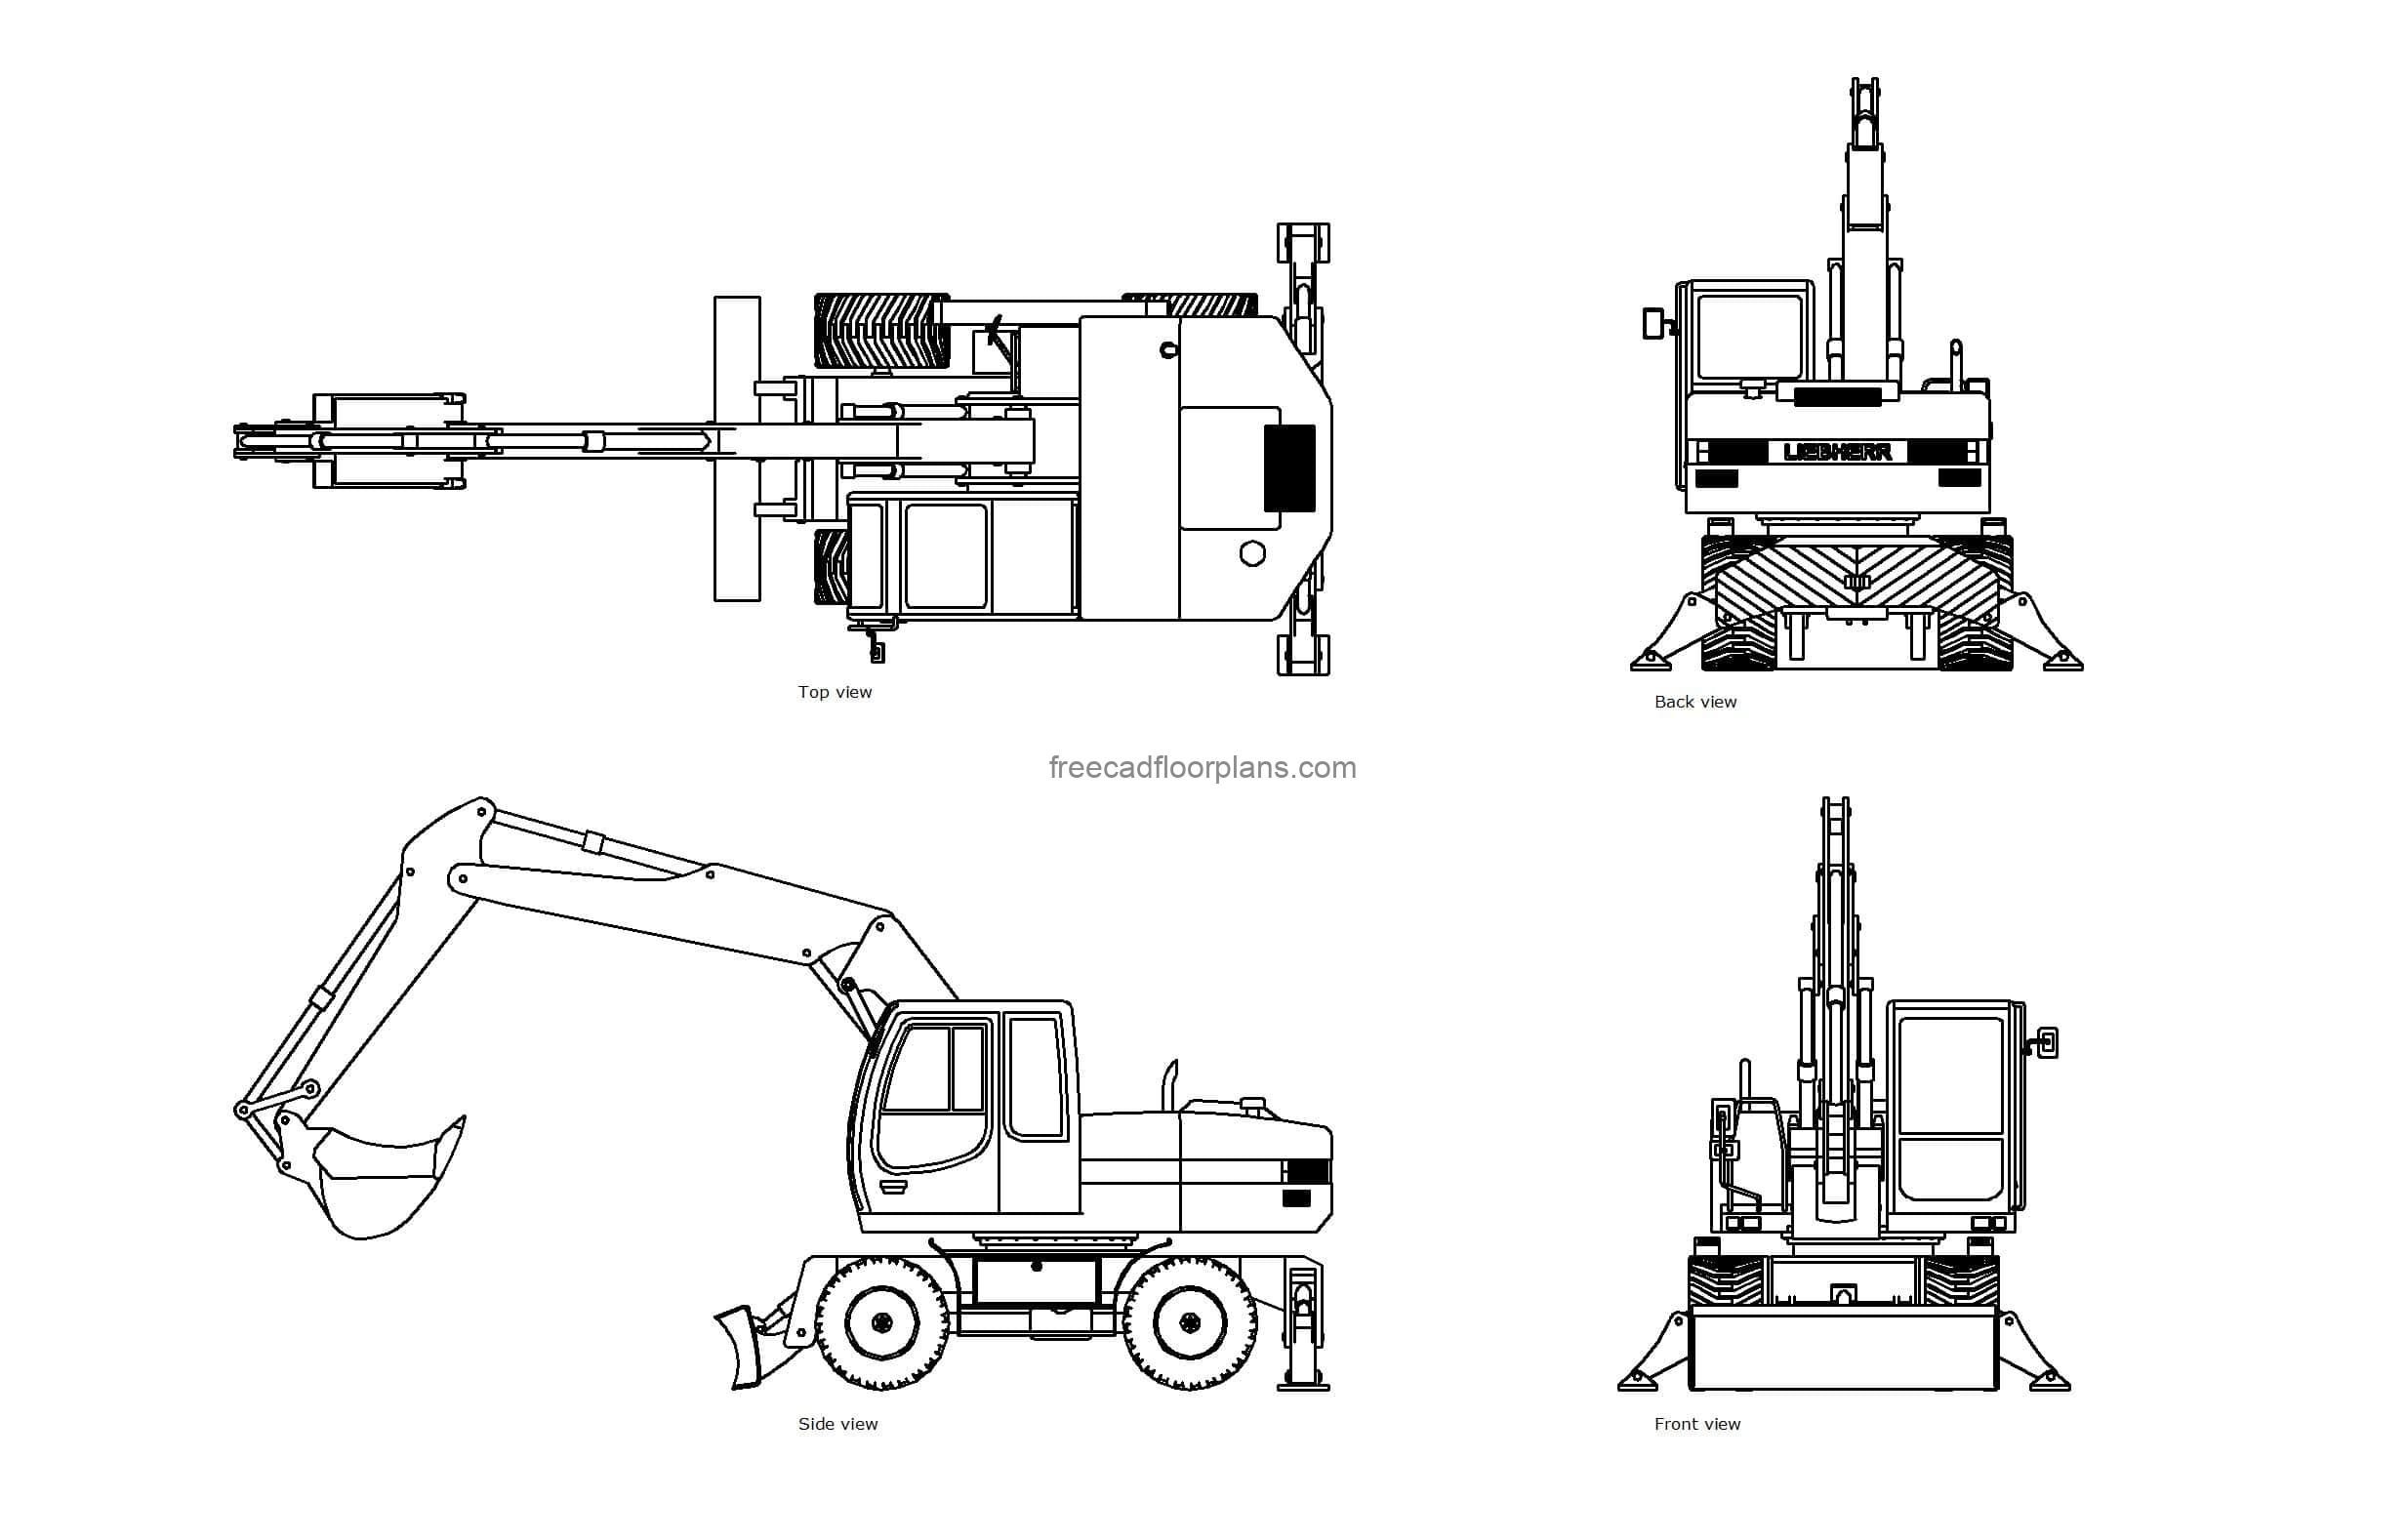 autocad drawing of a digger machine, plan and elevation 2d views, dwg file free for download